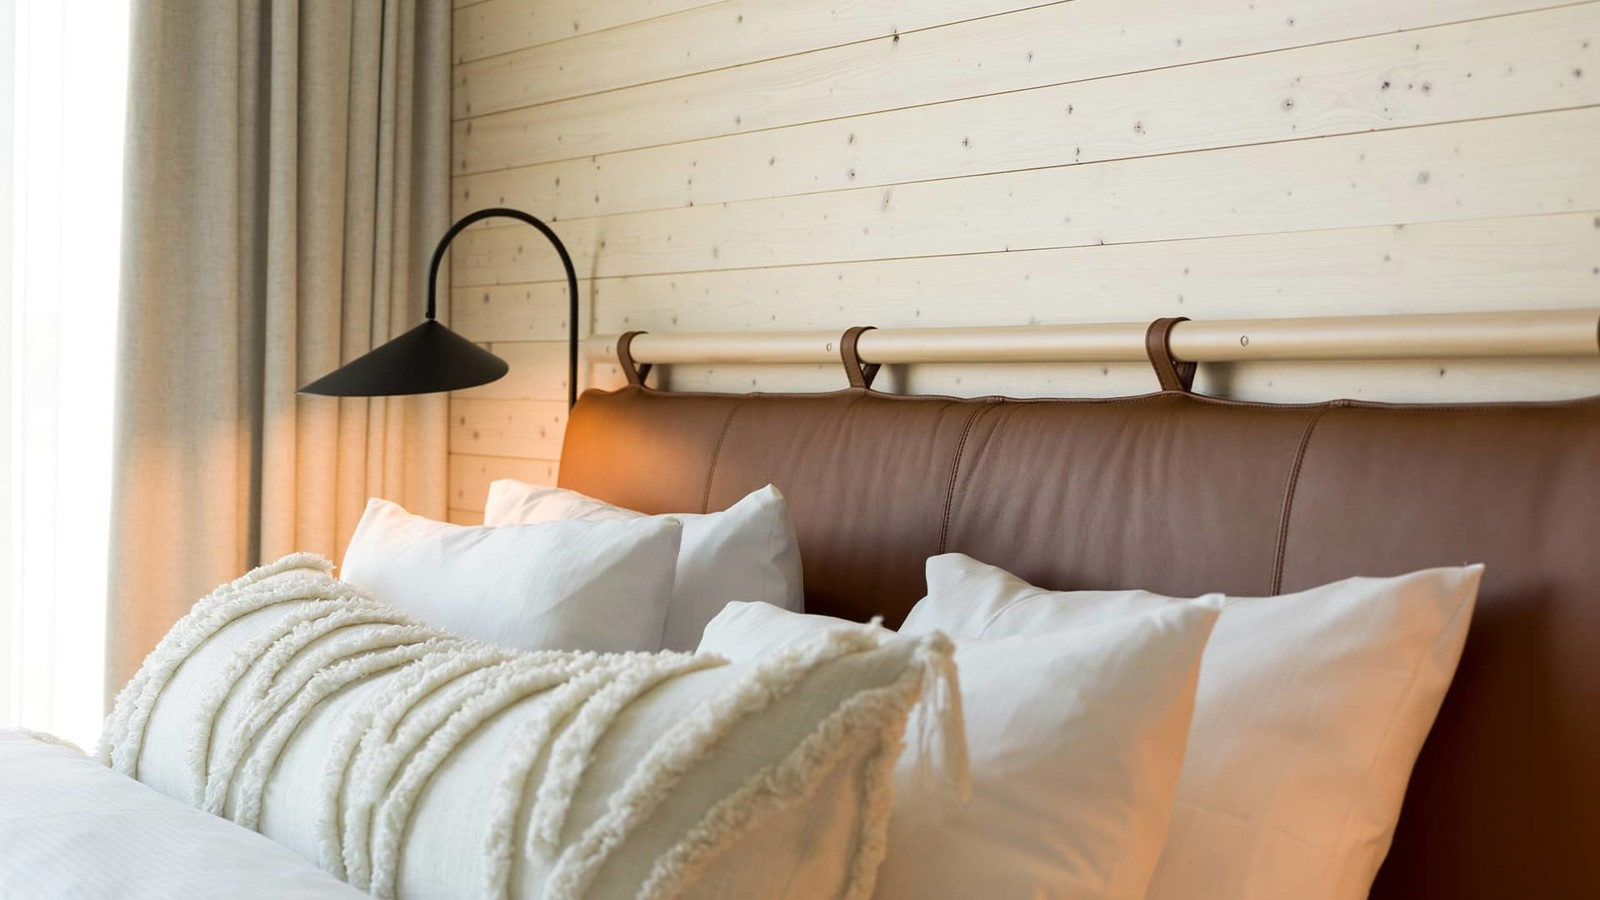 Fluffy bed with brown leather headboard standing in front of a light wood paneled wall